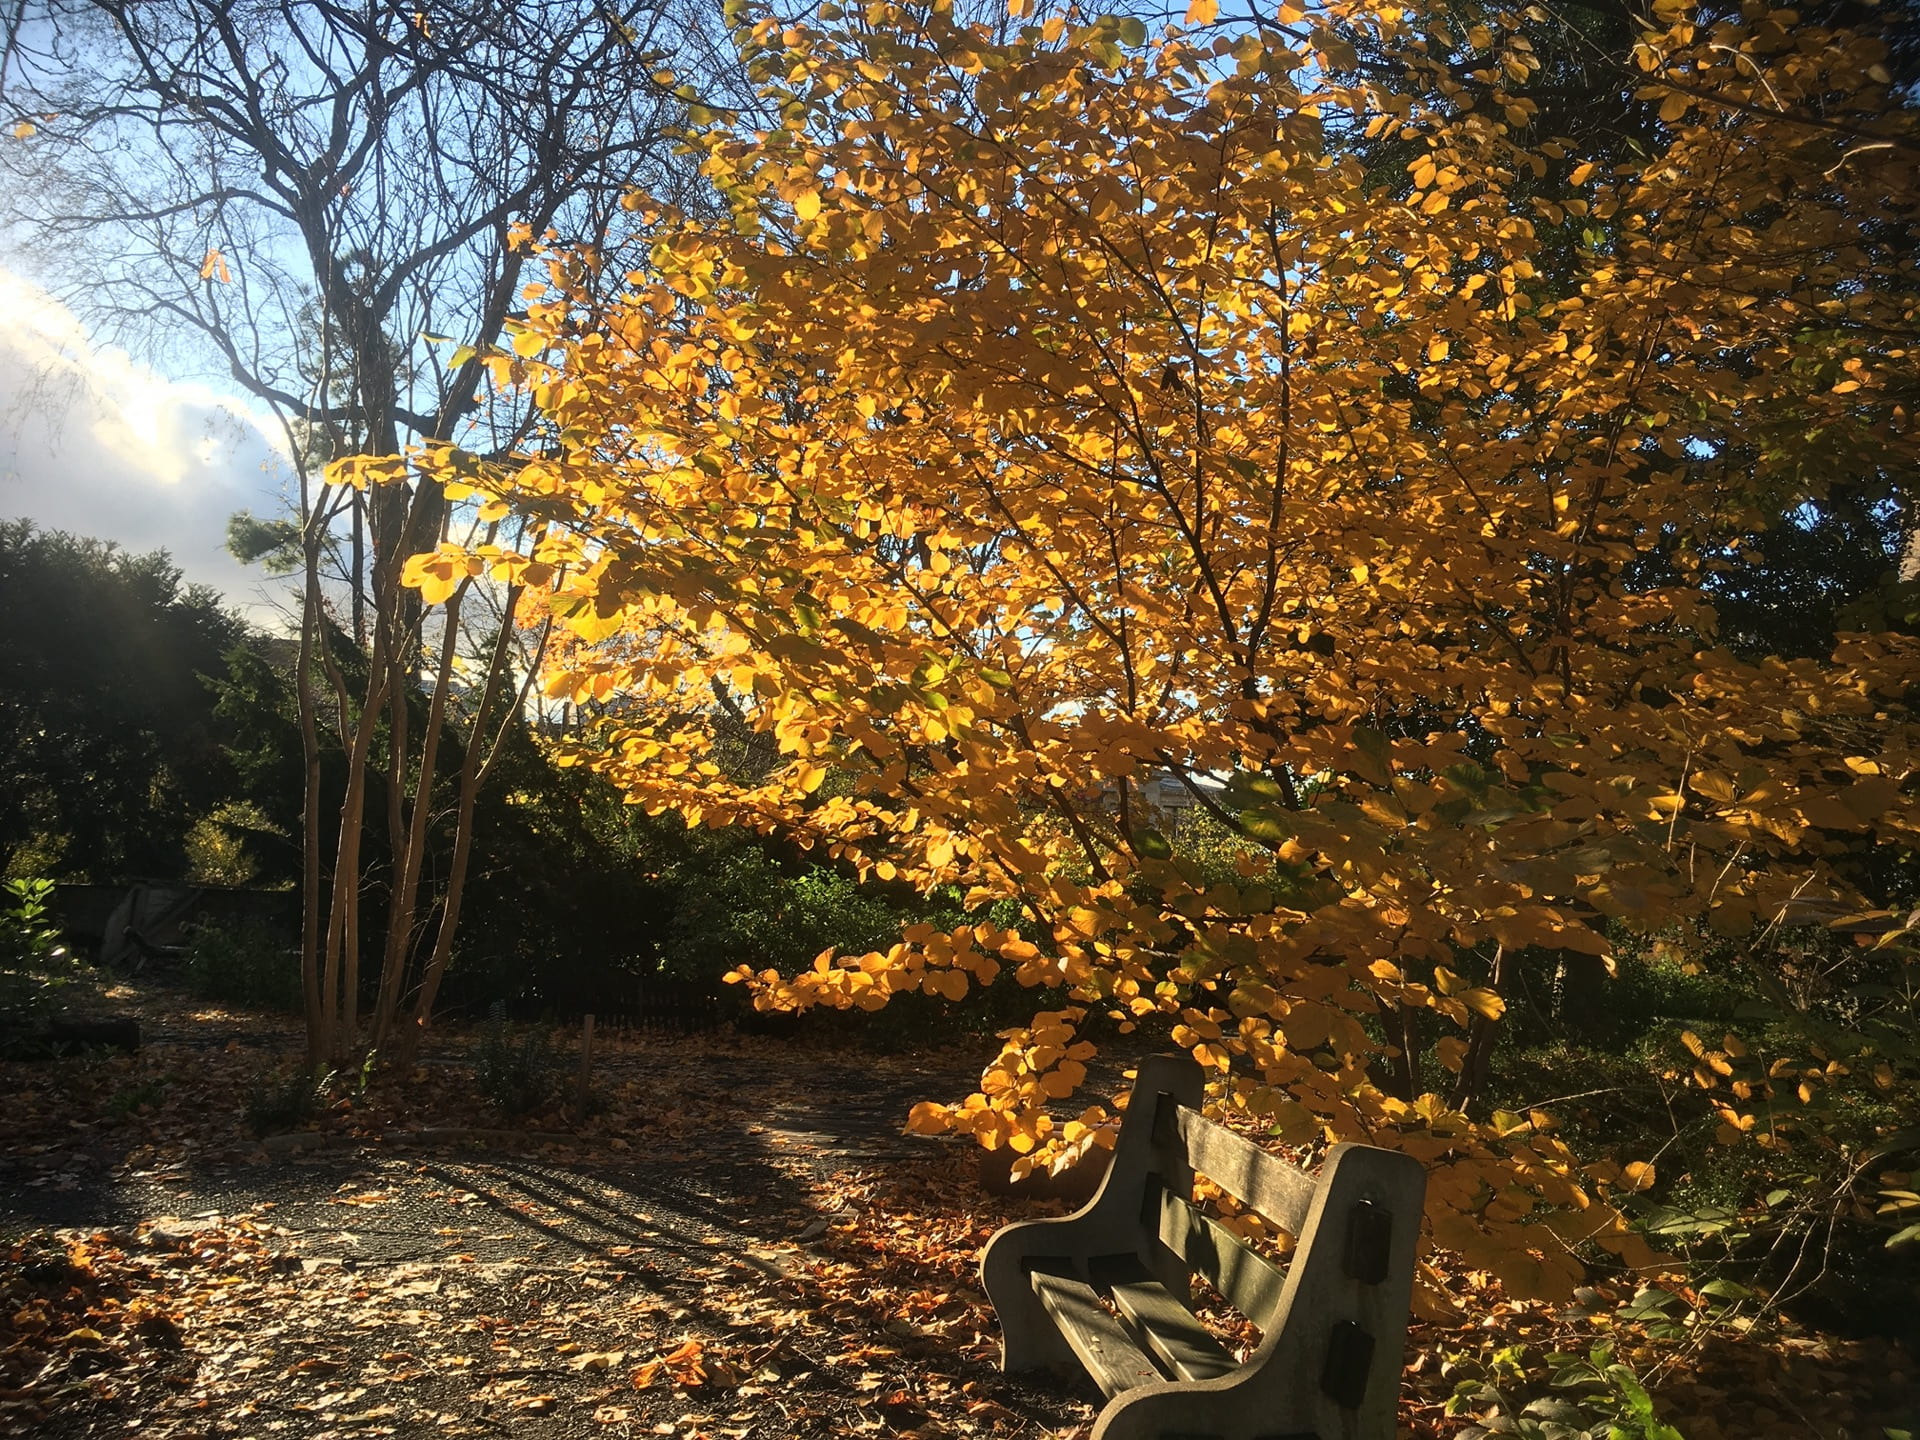 This bench is in the perfect spot to soak up the sun and enjoy the fall color of Hamamelis mollis.